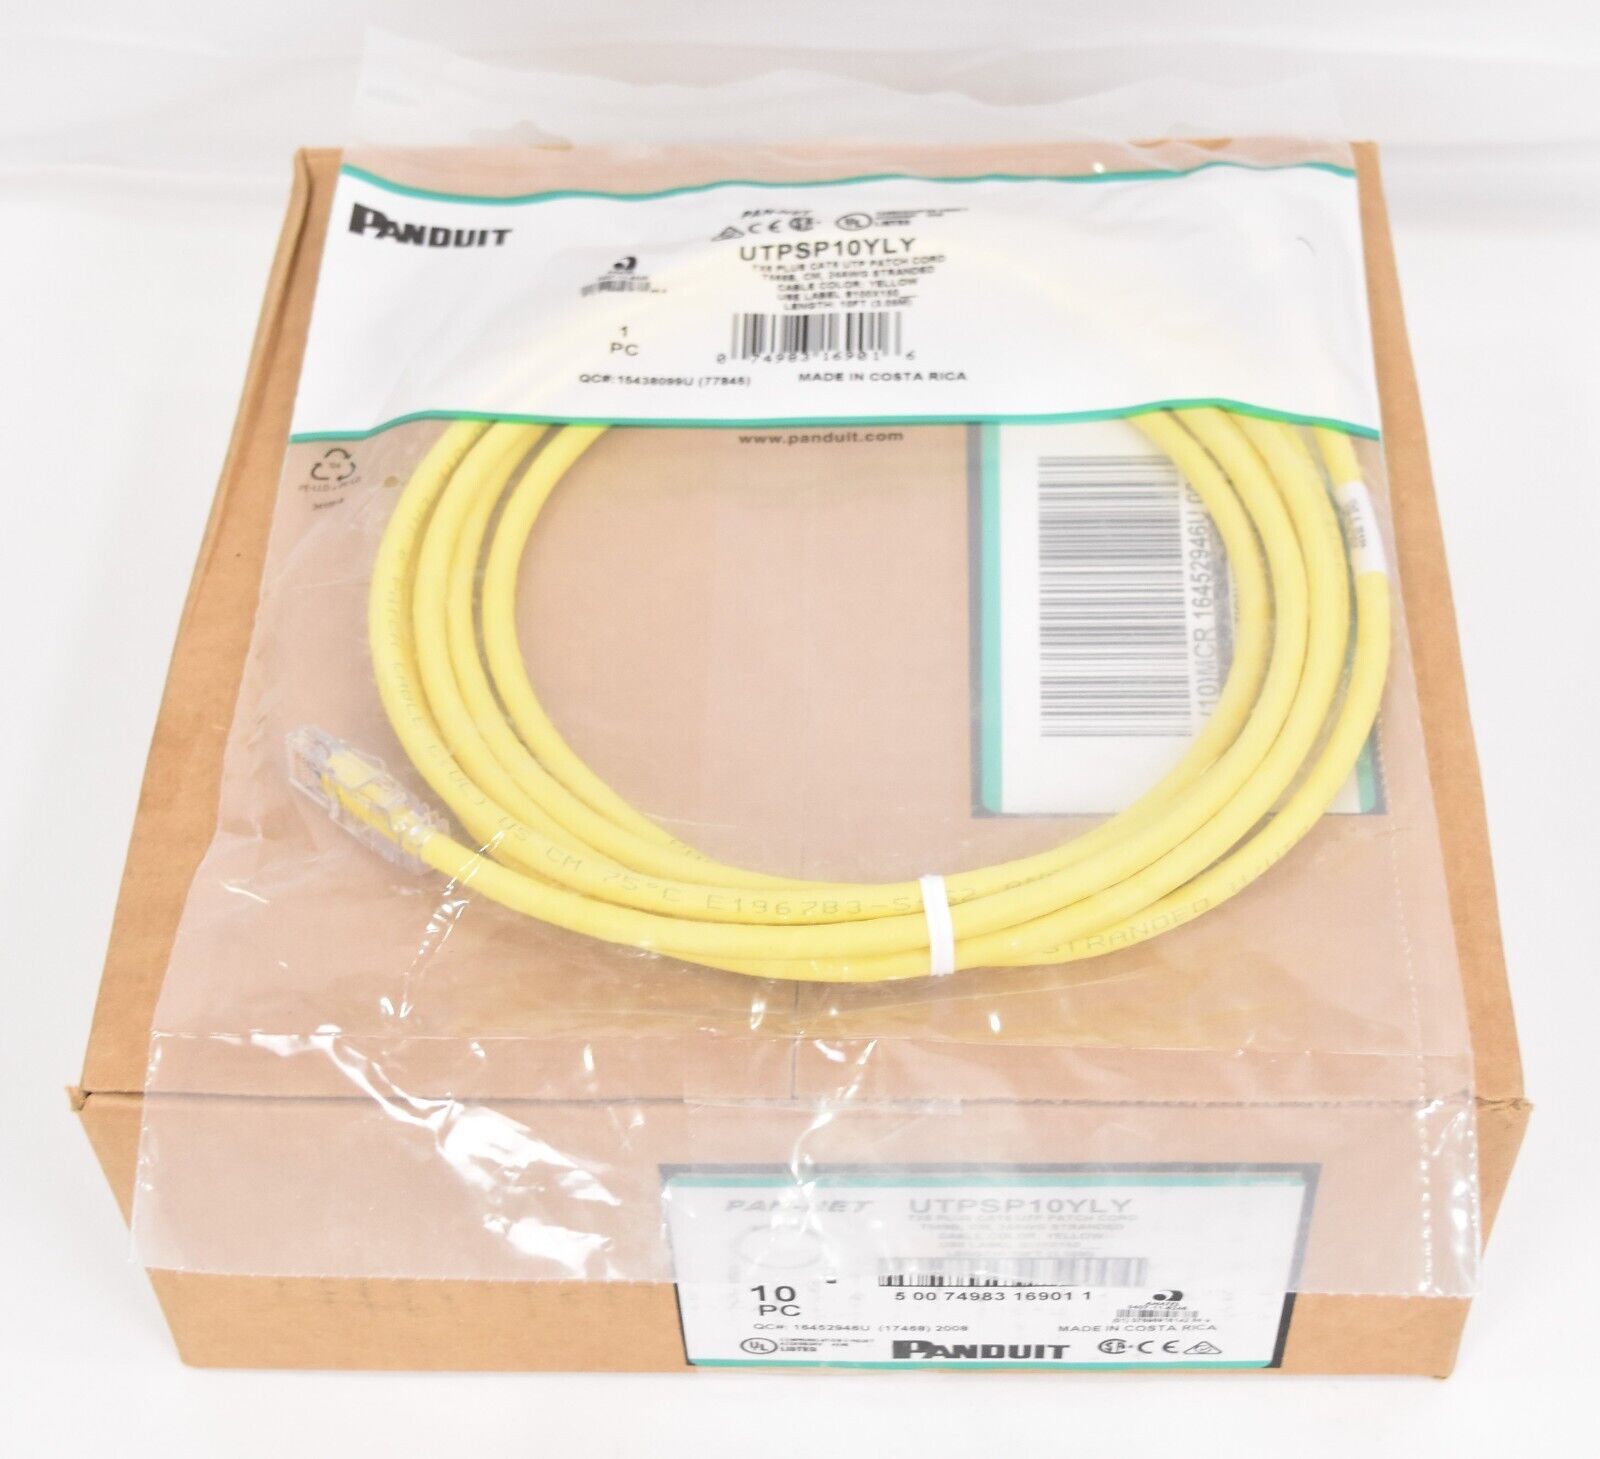 Box of (10) Panduit 10 Ft Yellow RJ45 Cat 6 Ethernet Patch Cables UTPSP10YLY